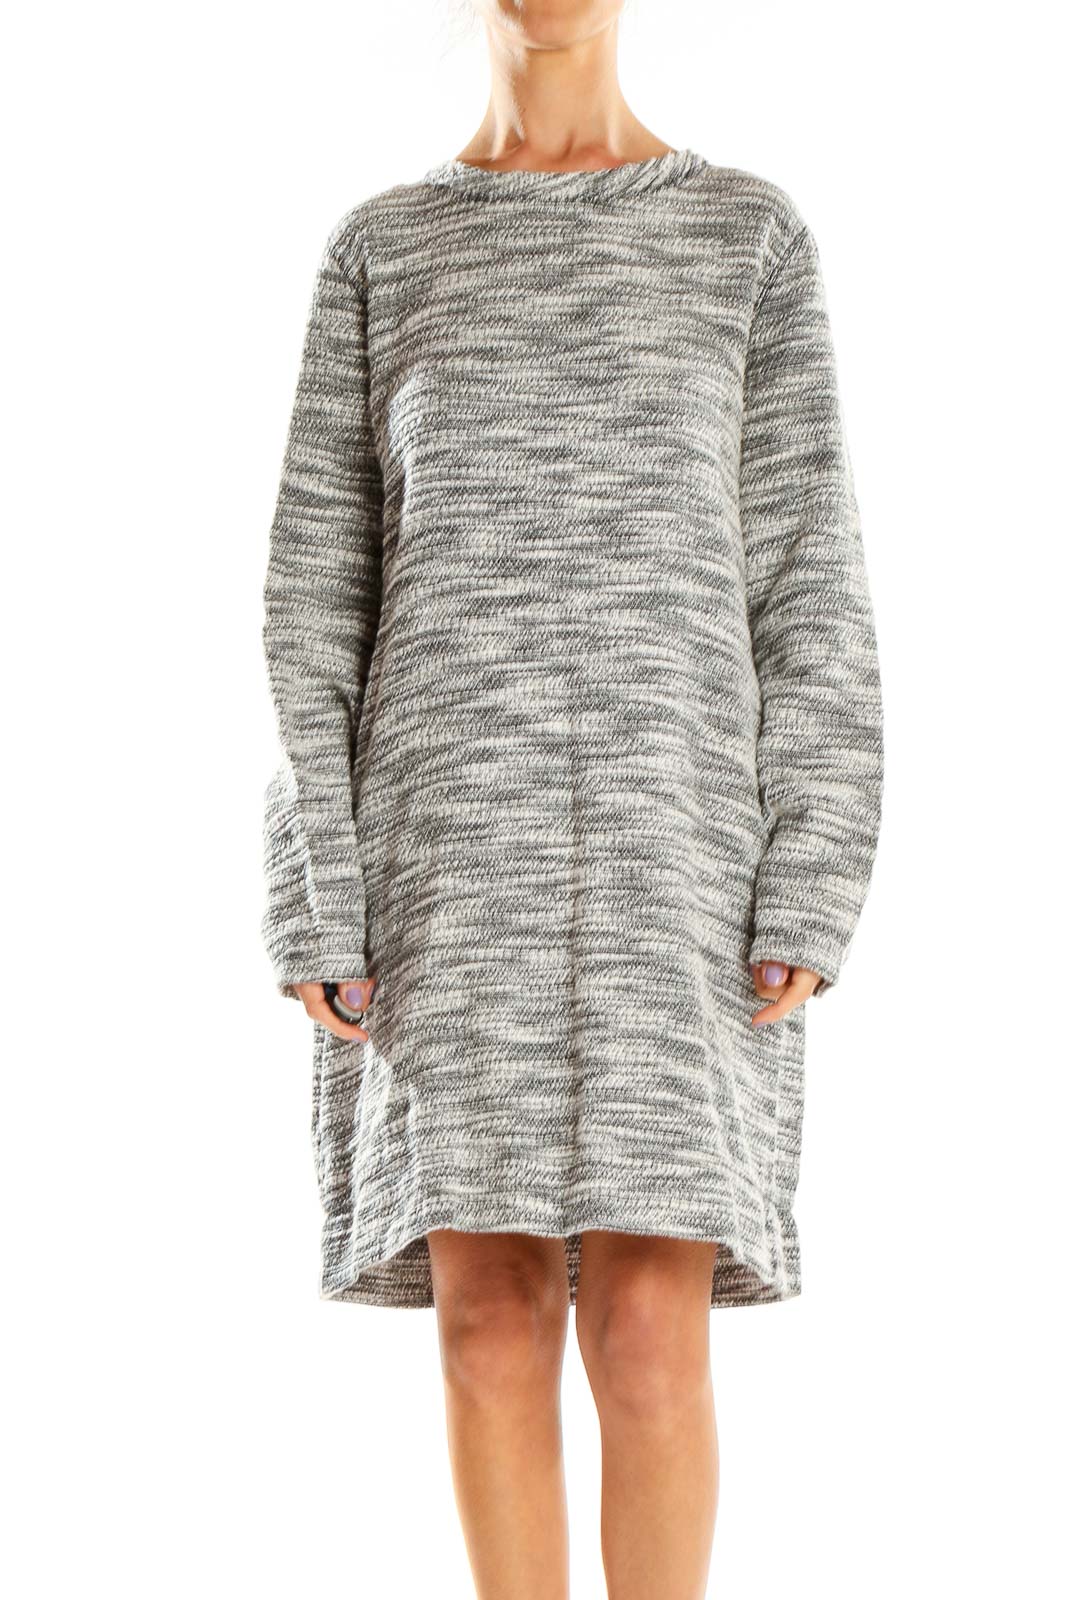 Gray Sweater Dress Front